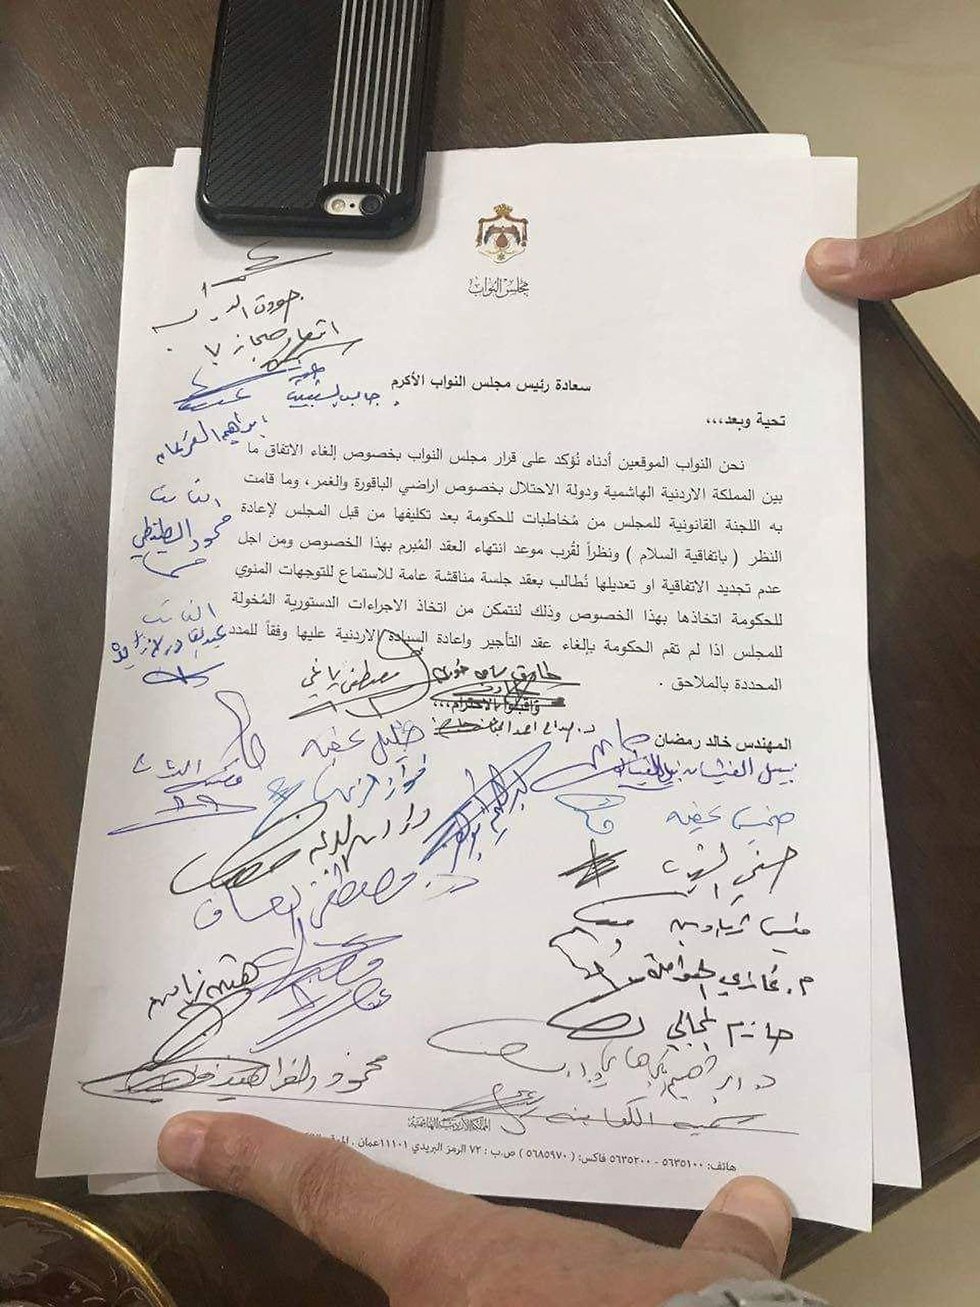 The letter signed by Jordanian MP's calling to cancel the lease. (Photo: Twitter)